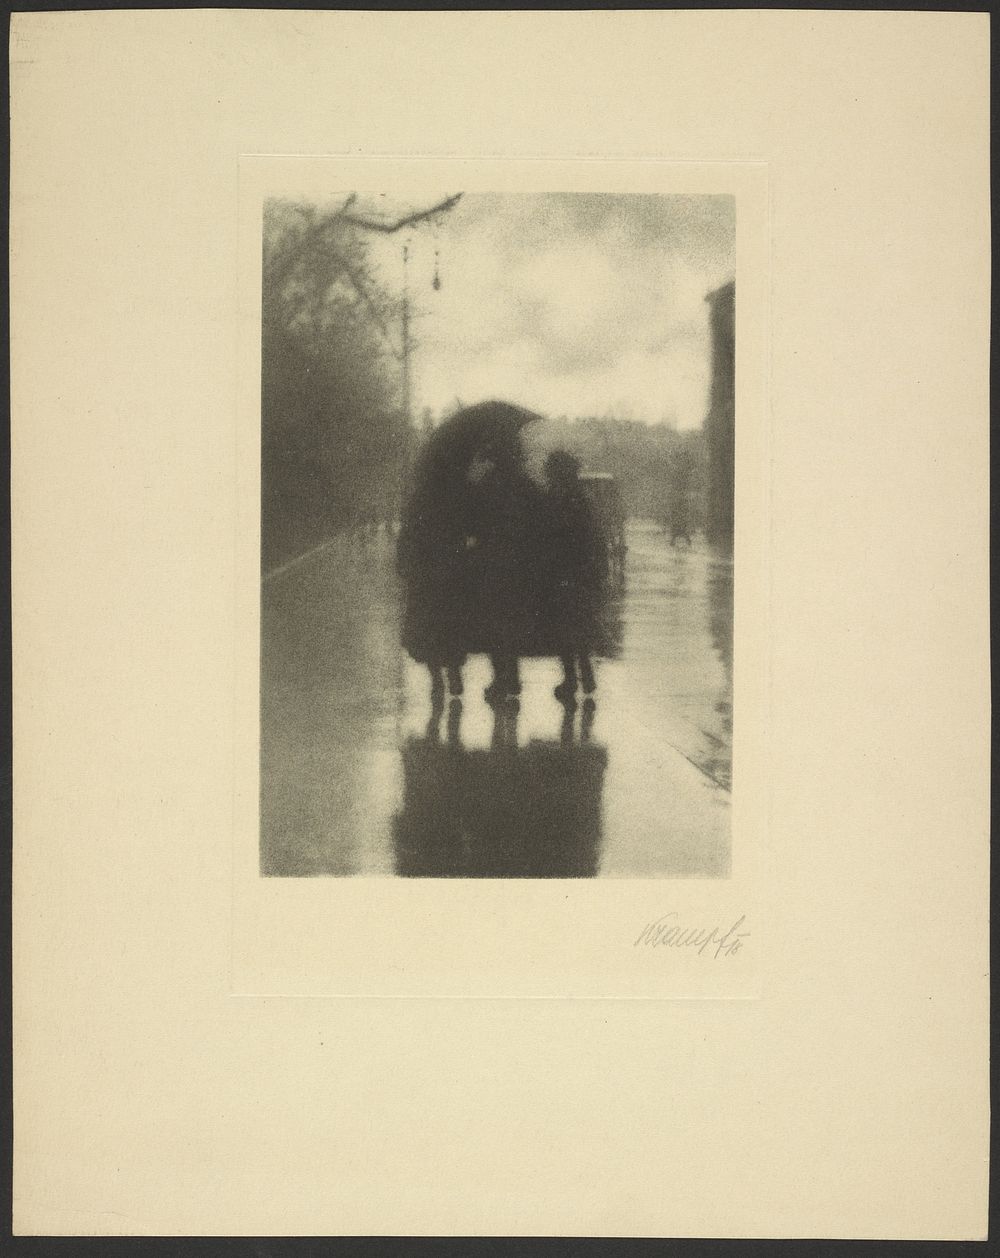 Three figures in the rain by Günther Krampf